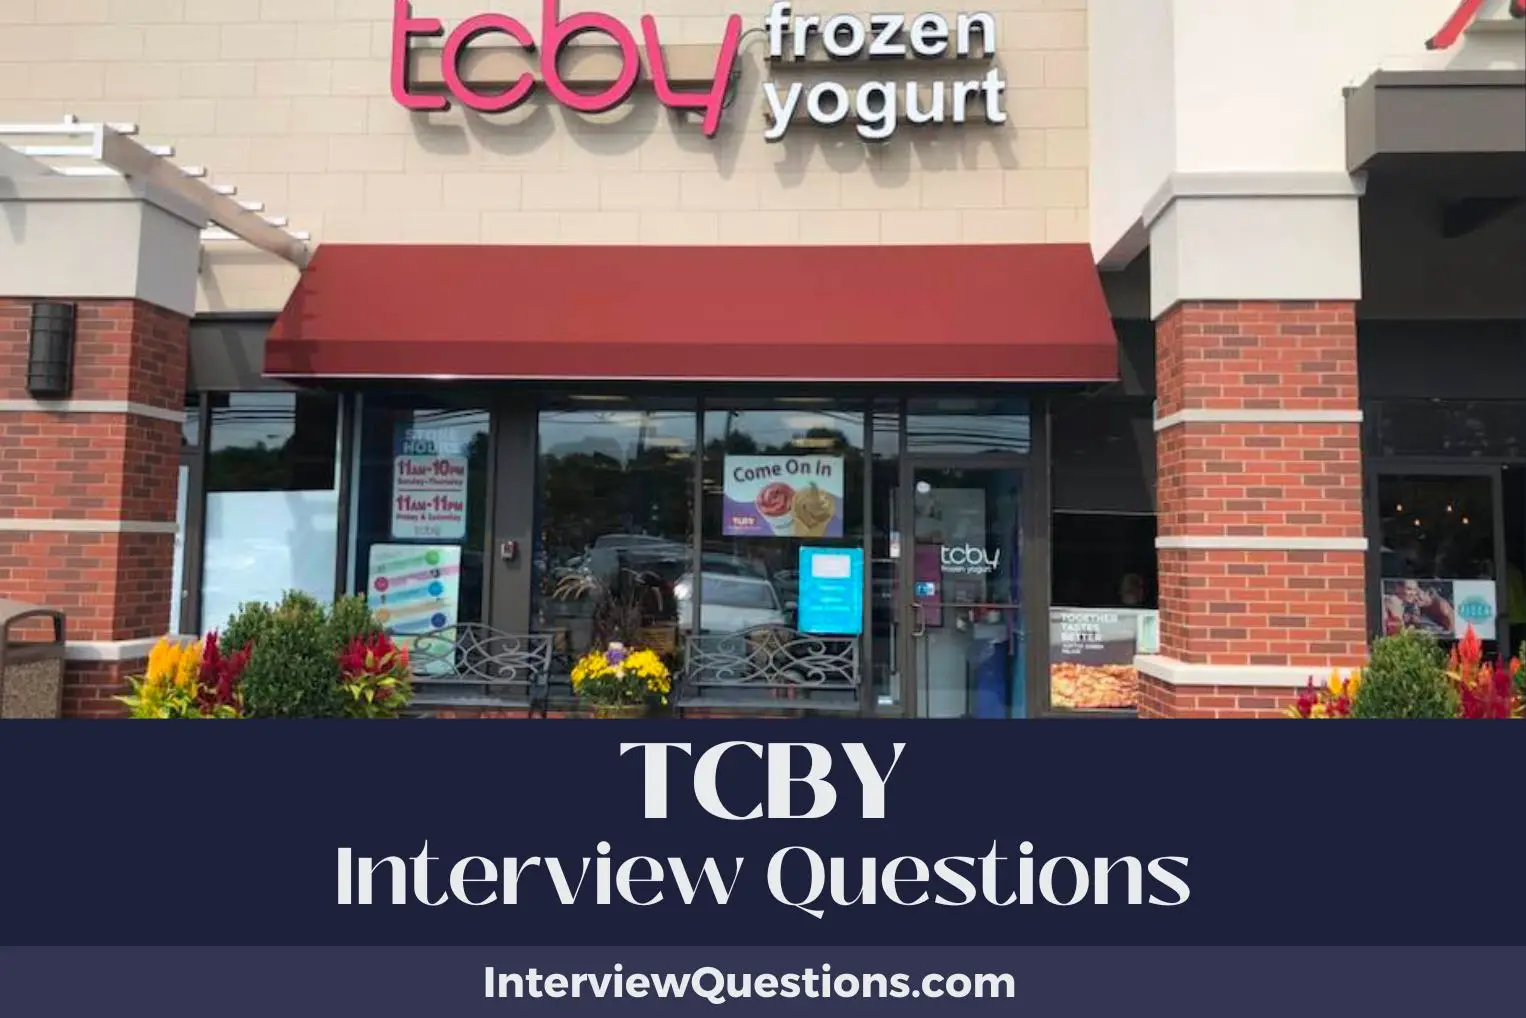 TCBY Interview Questions